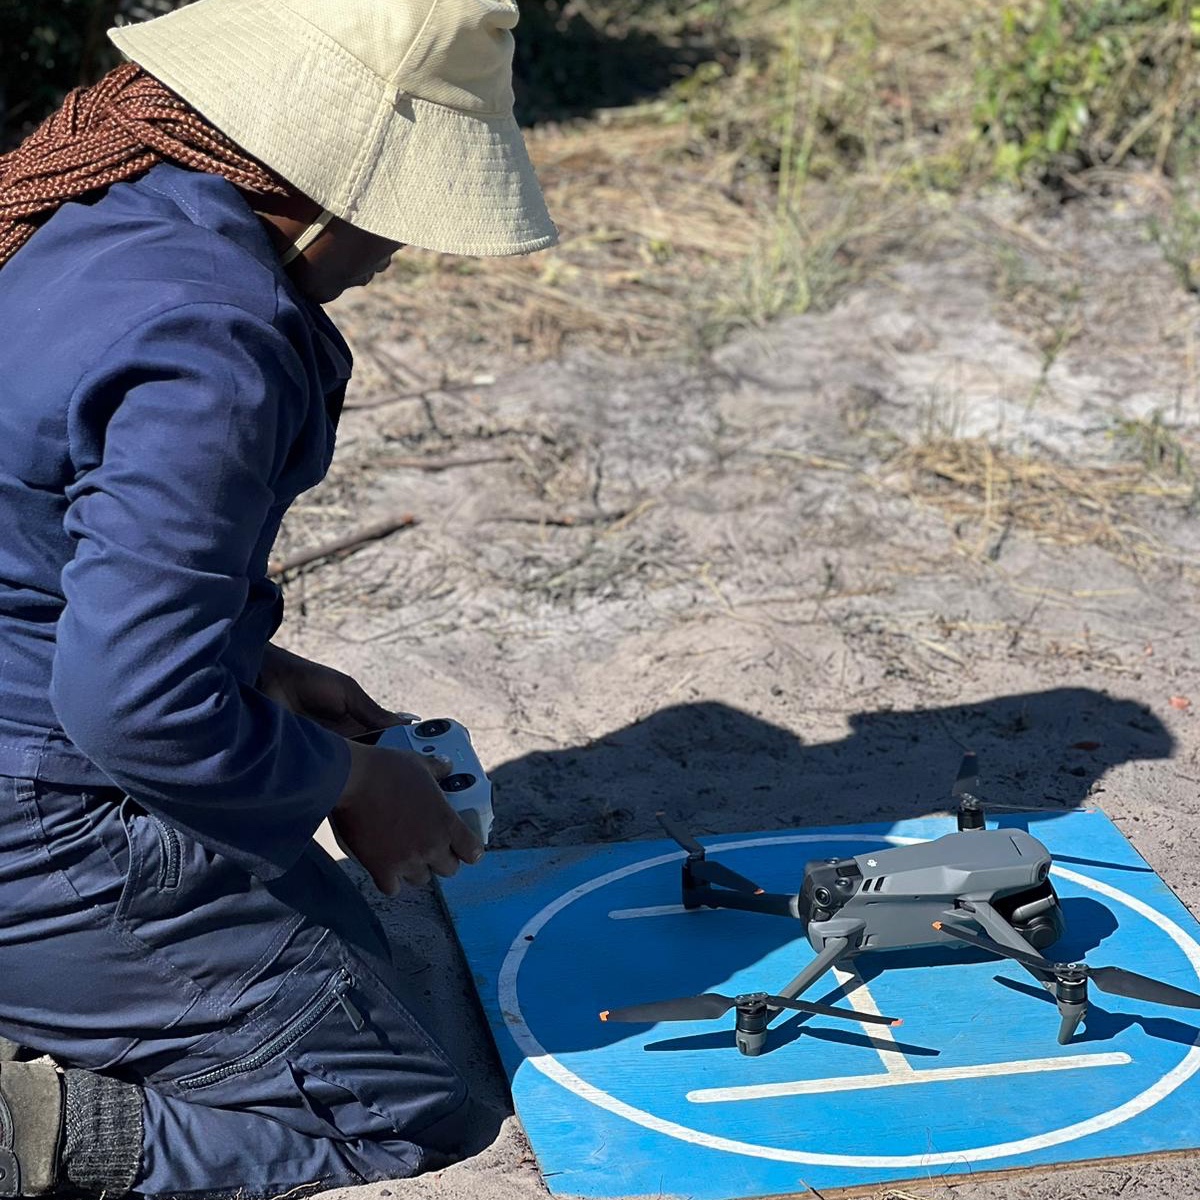 Our survey teams in Mavinga, #Angola 🇦🇴 are now trained drone operators! Recent drone training will help us tackle remote areas more effectively. 💪 Take a look at the team in action!